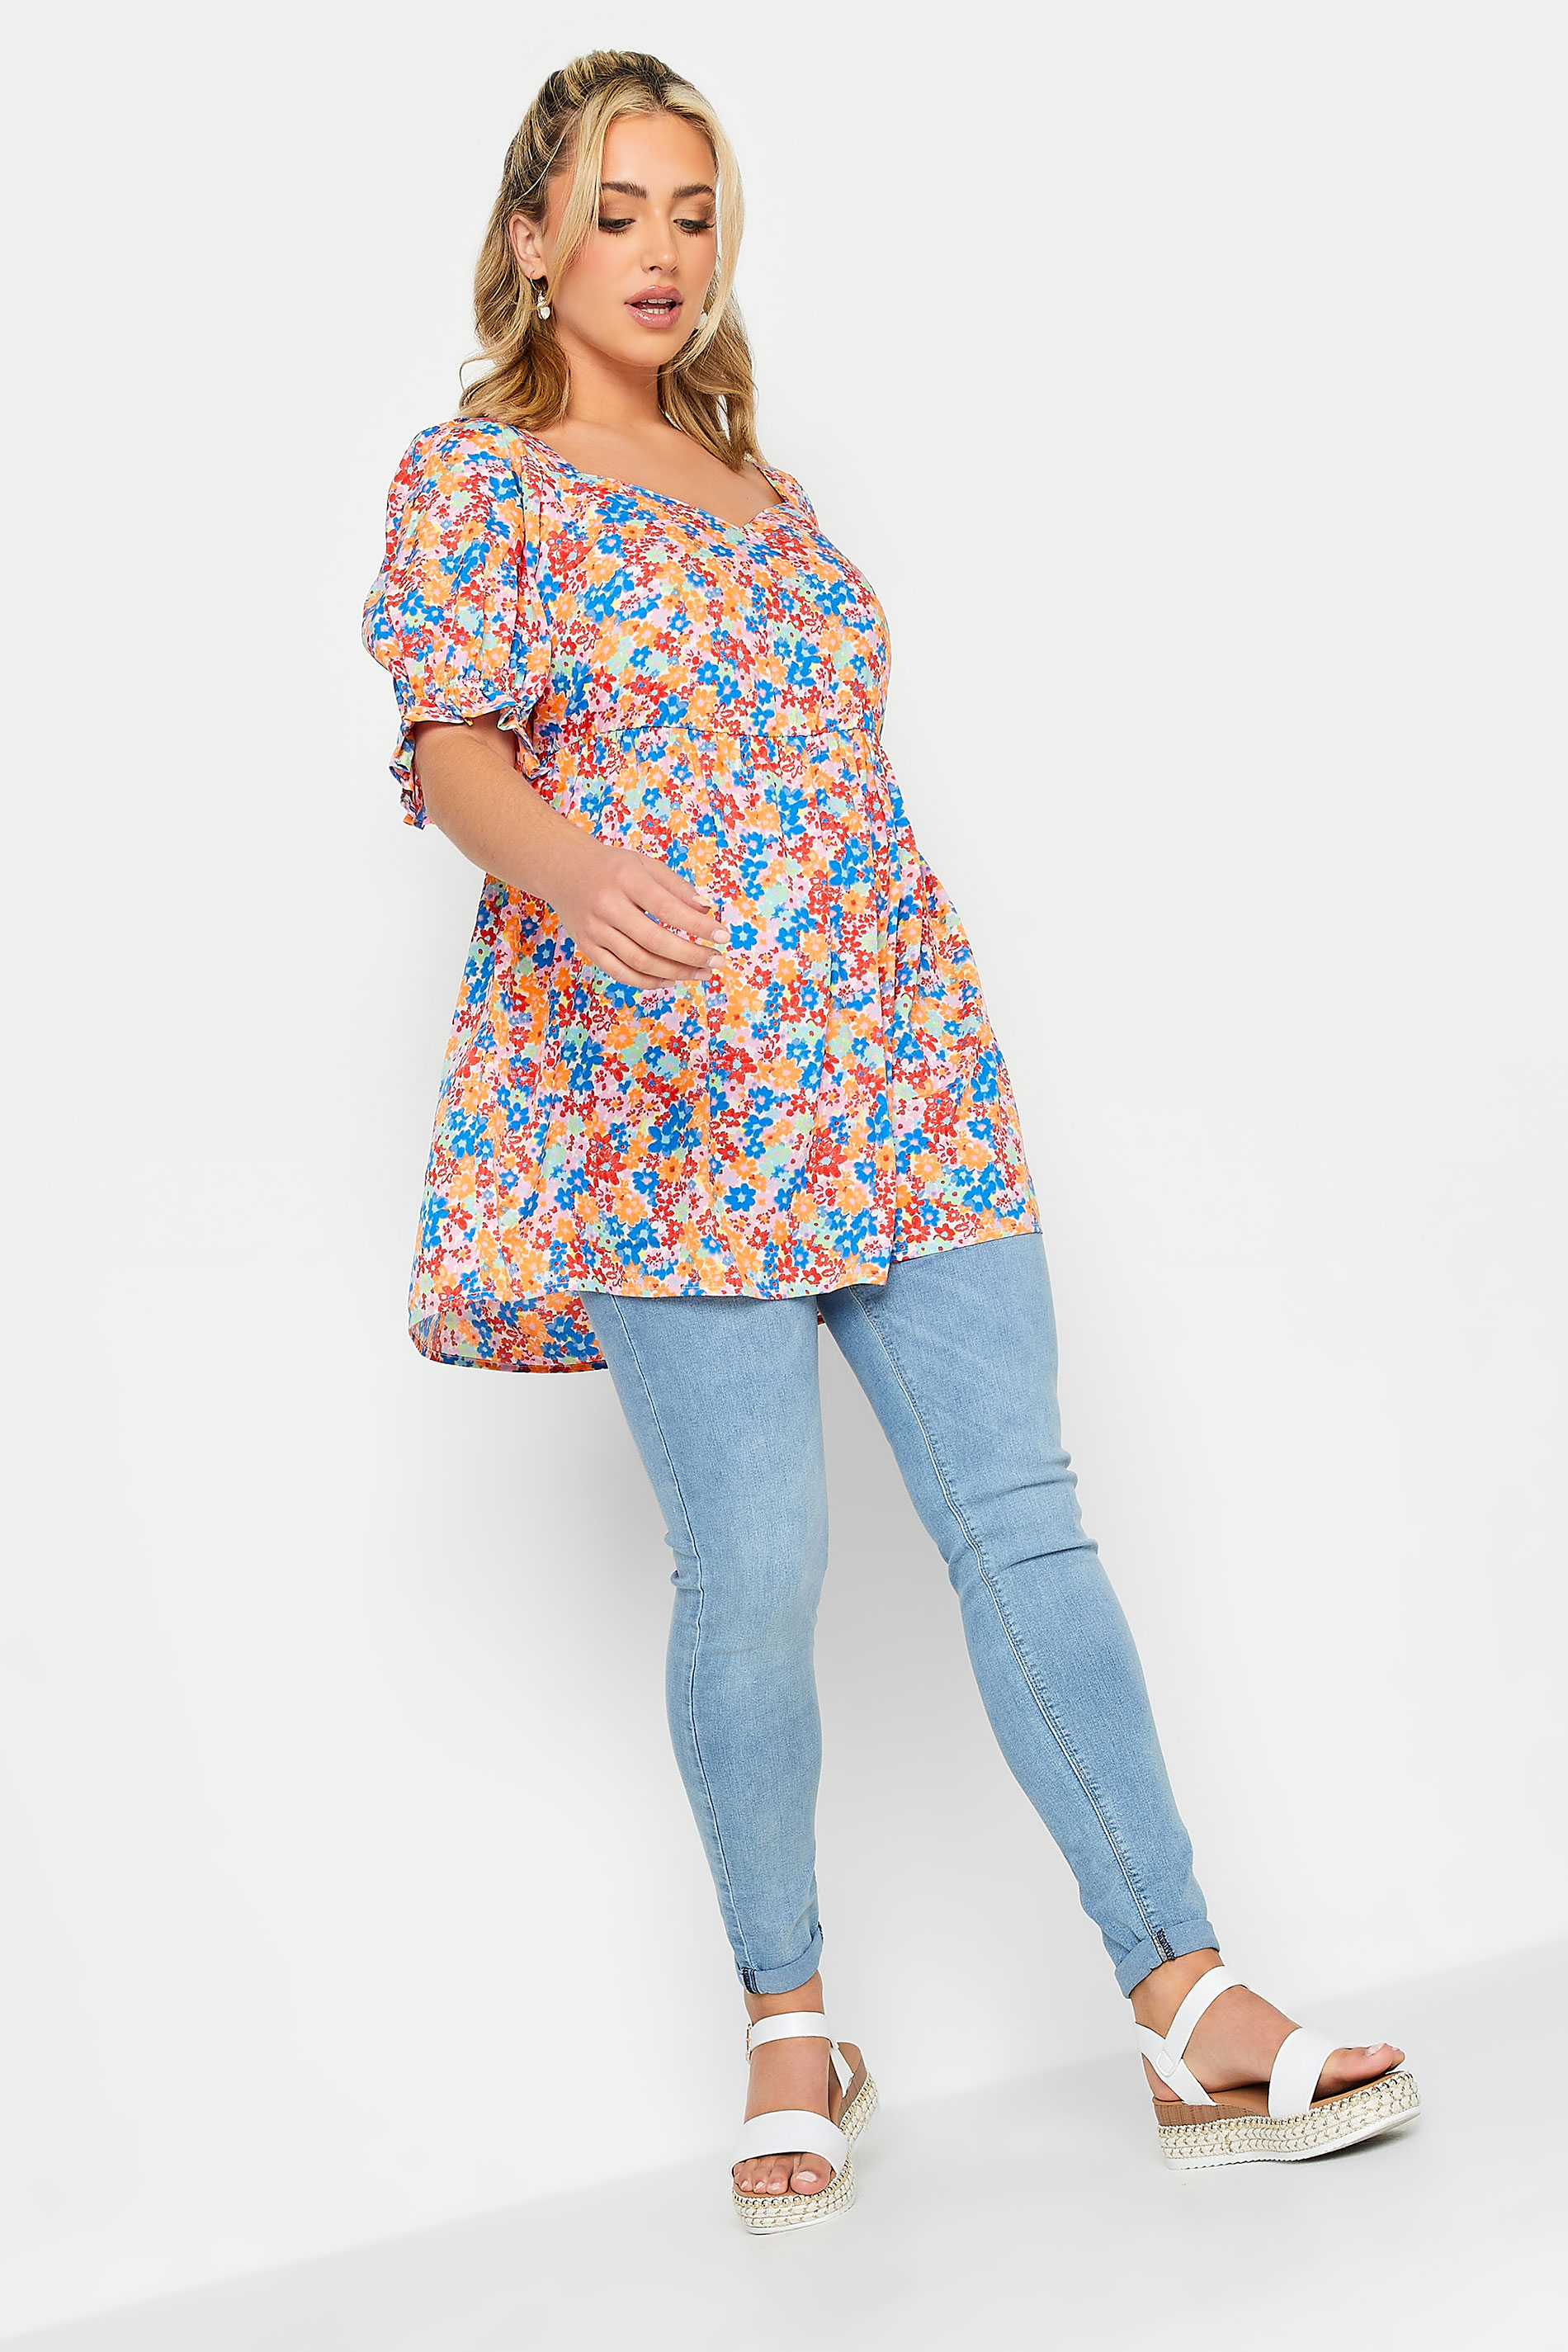 LIMITED COLLECTION Orange Plus Size Floral Peplum Top | Yours Clothing  3